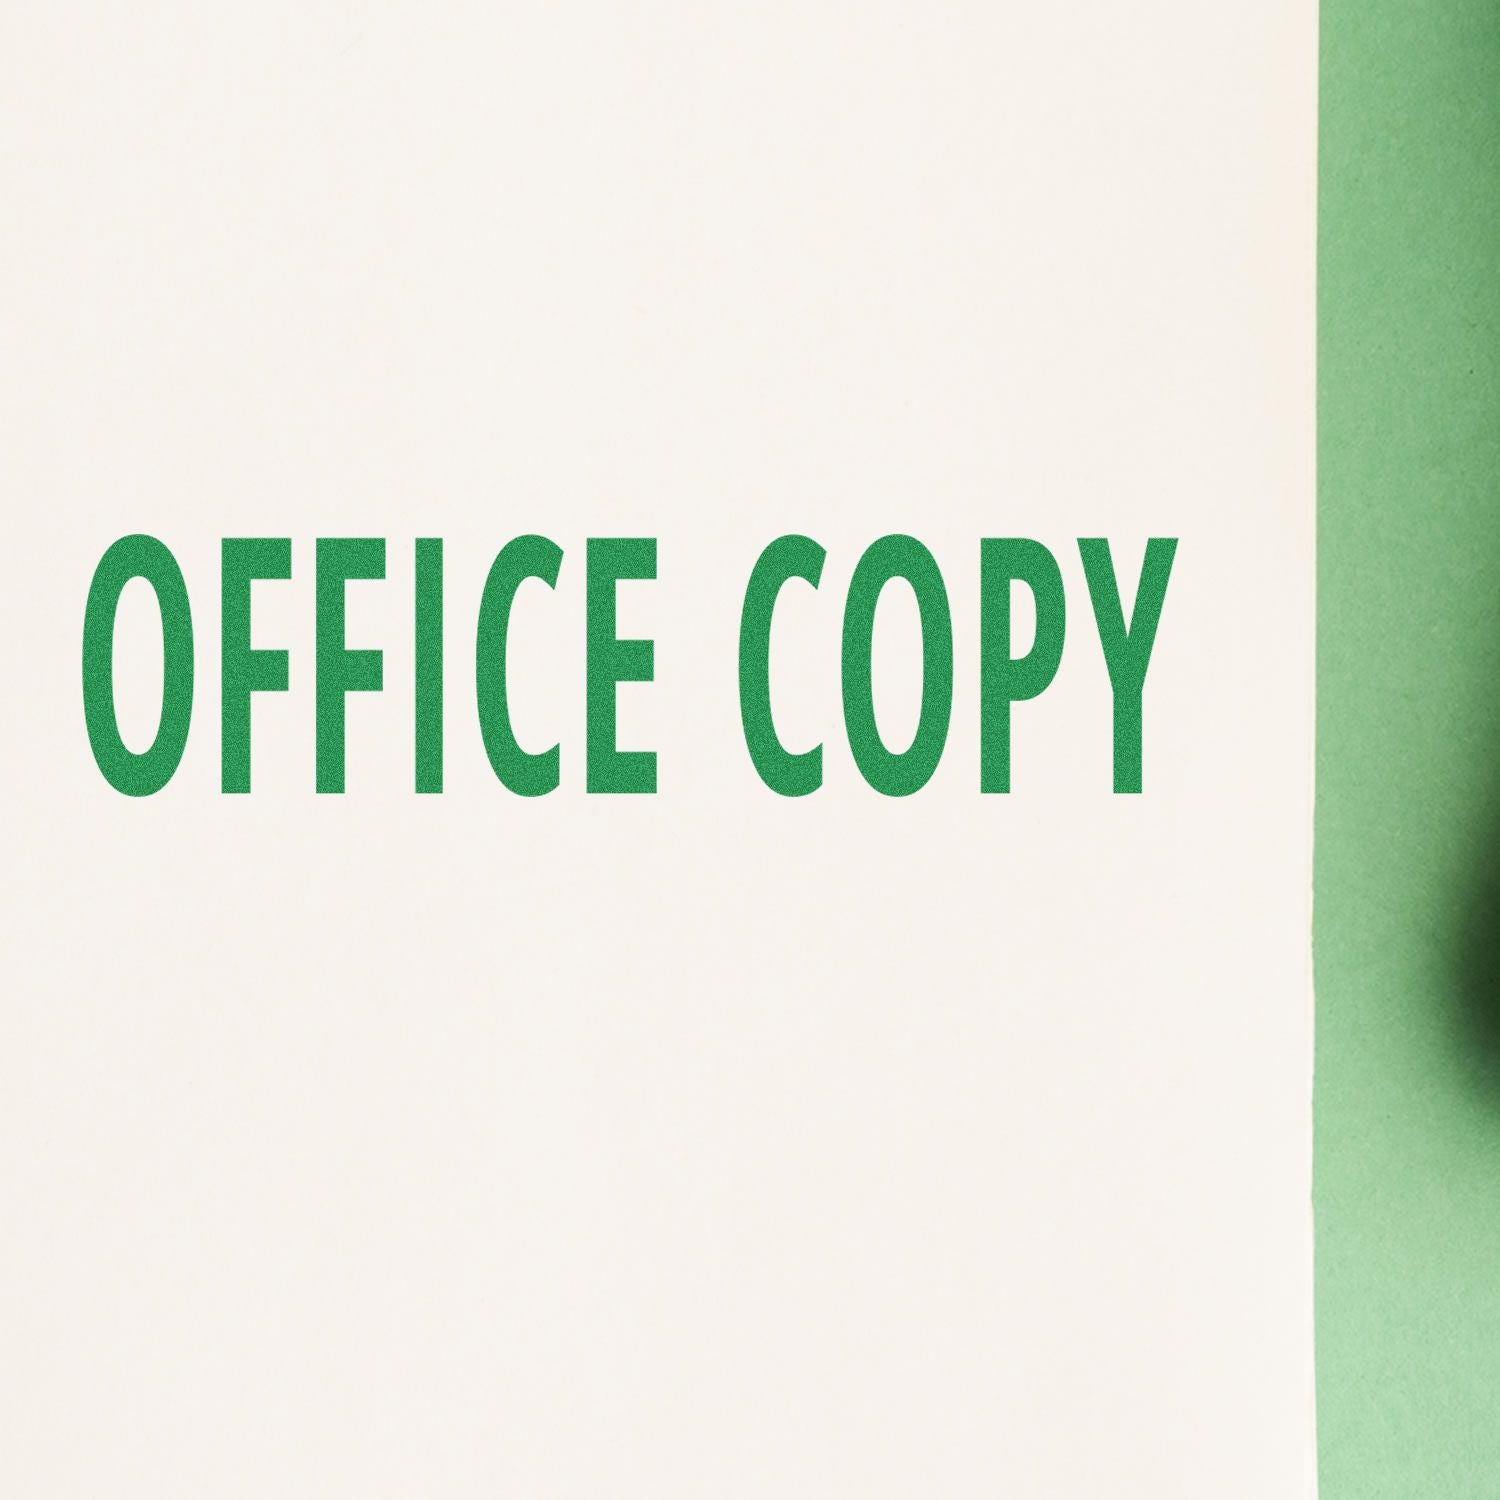 A stock office rubber stamp with a stamped image showing how the text "OFFICE COPY" is displayed after stamping.